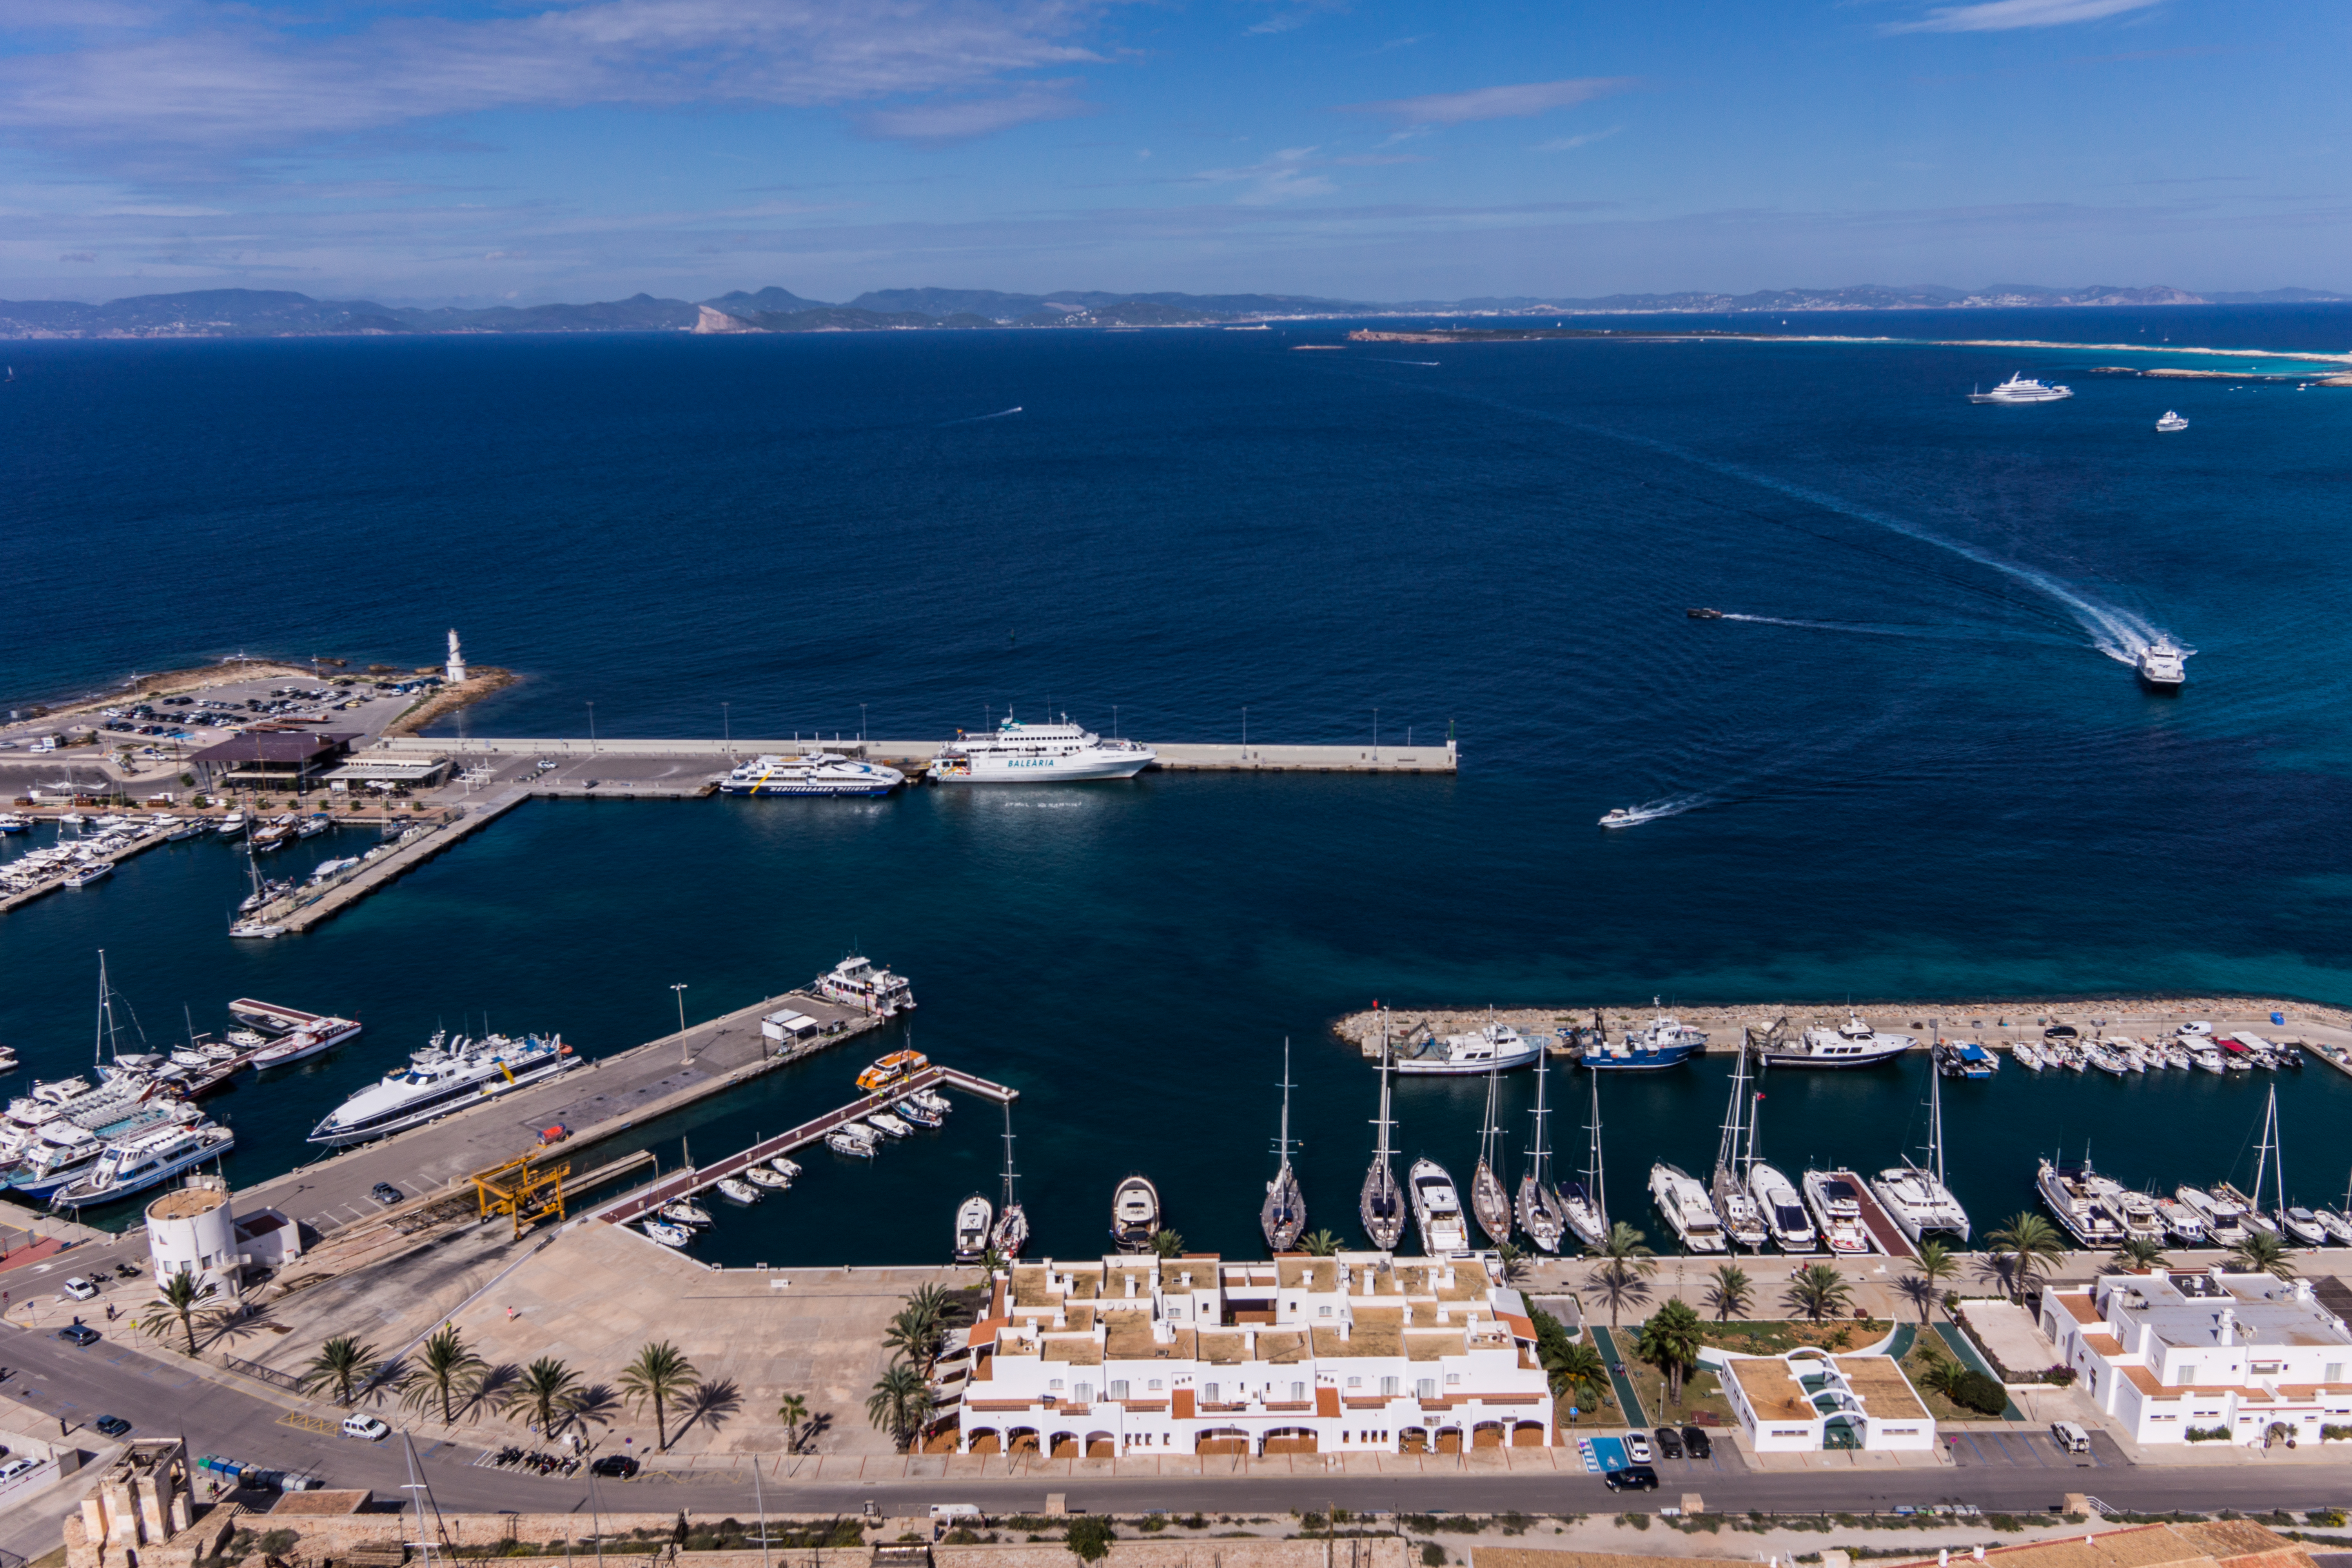 The APB offices in the port of La Savina will be moved to the Levante dock